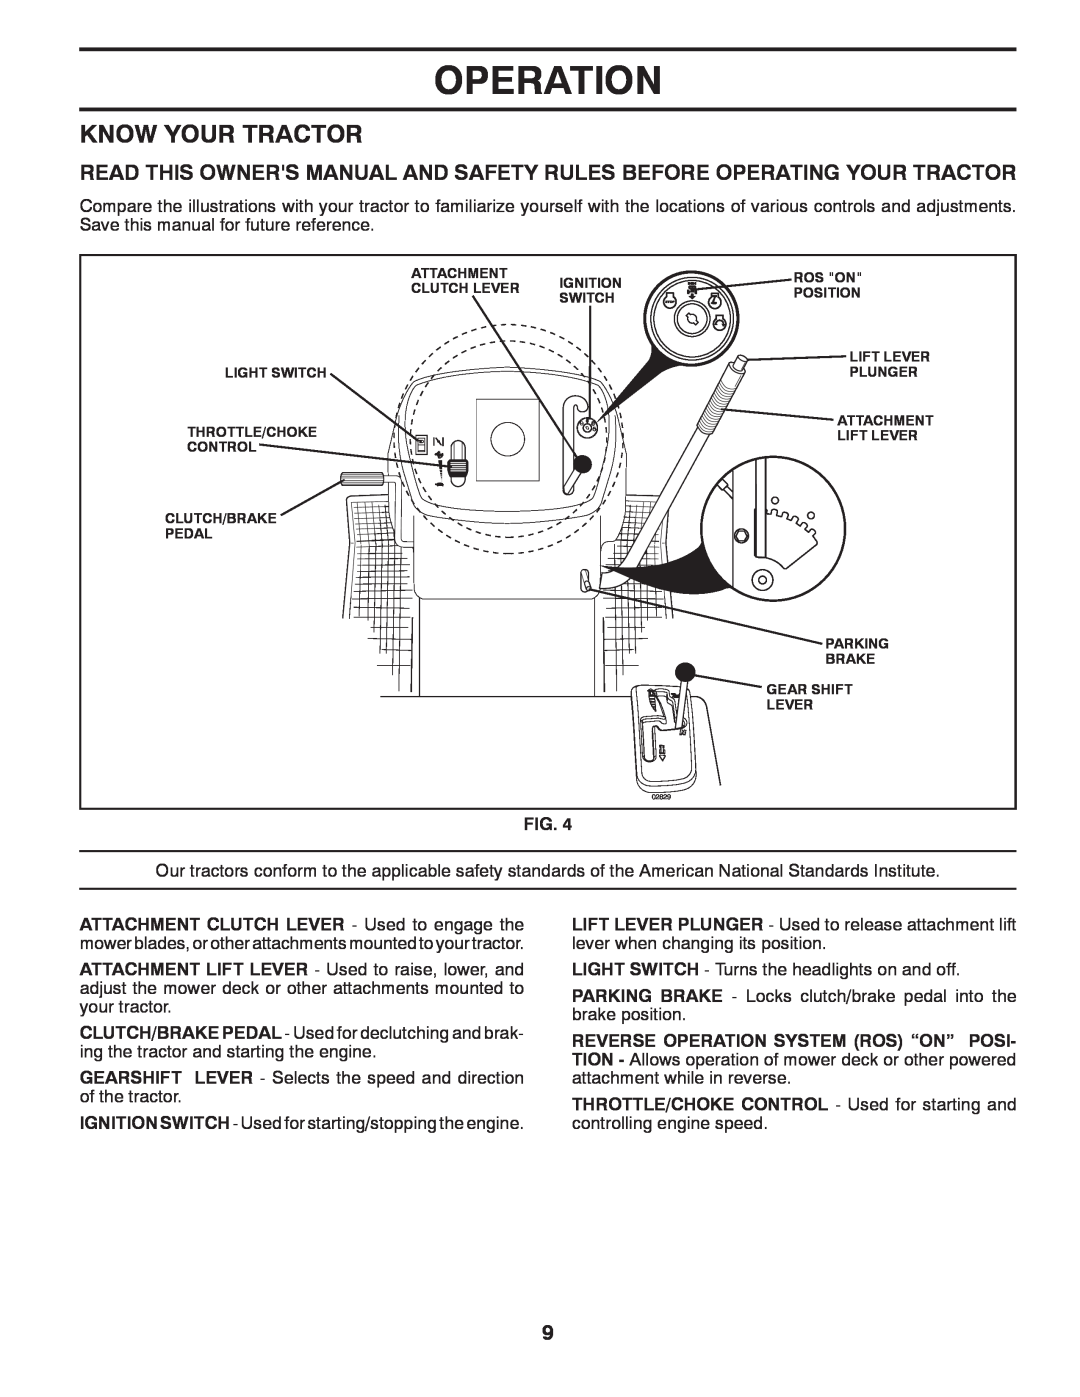 Poulan 424008 manual Know Your Tractor, Operation 